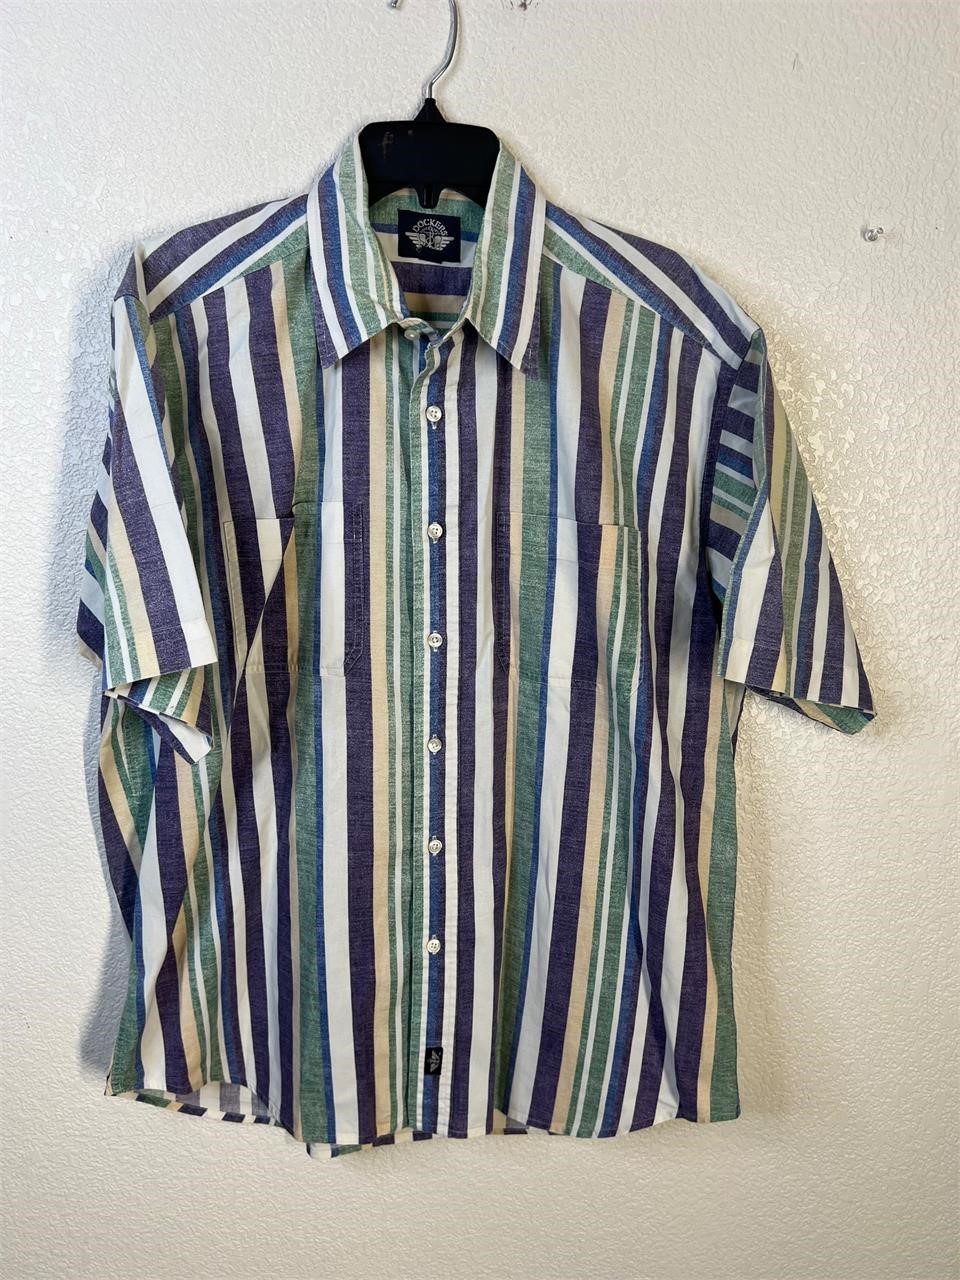 Vintage Dockers Striped Button Up Shirt